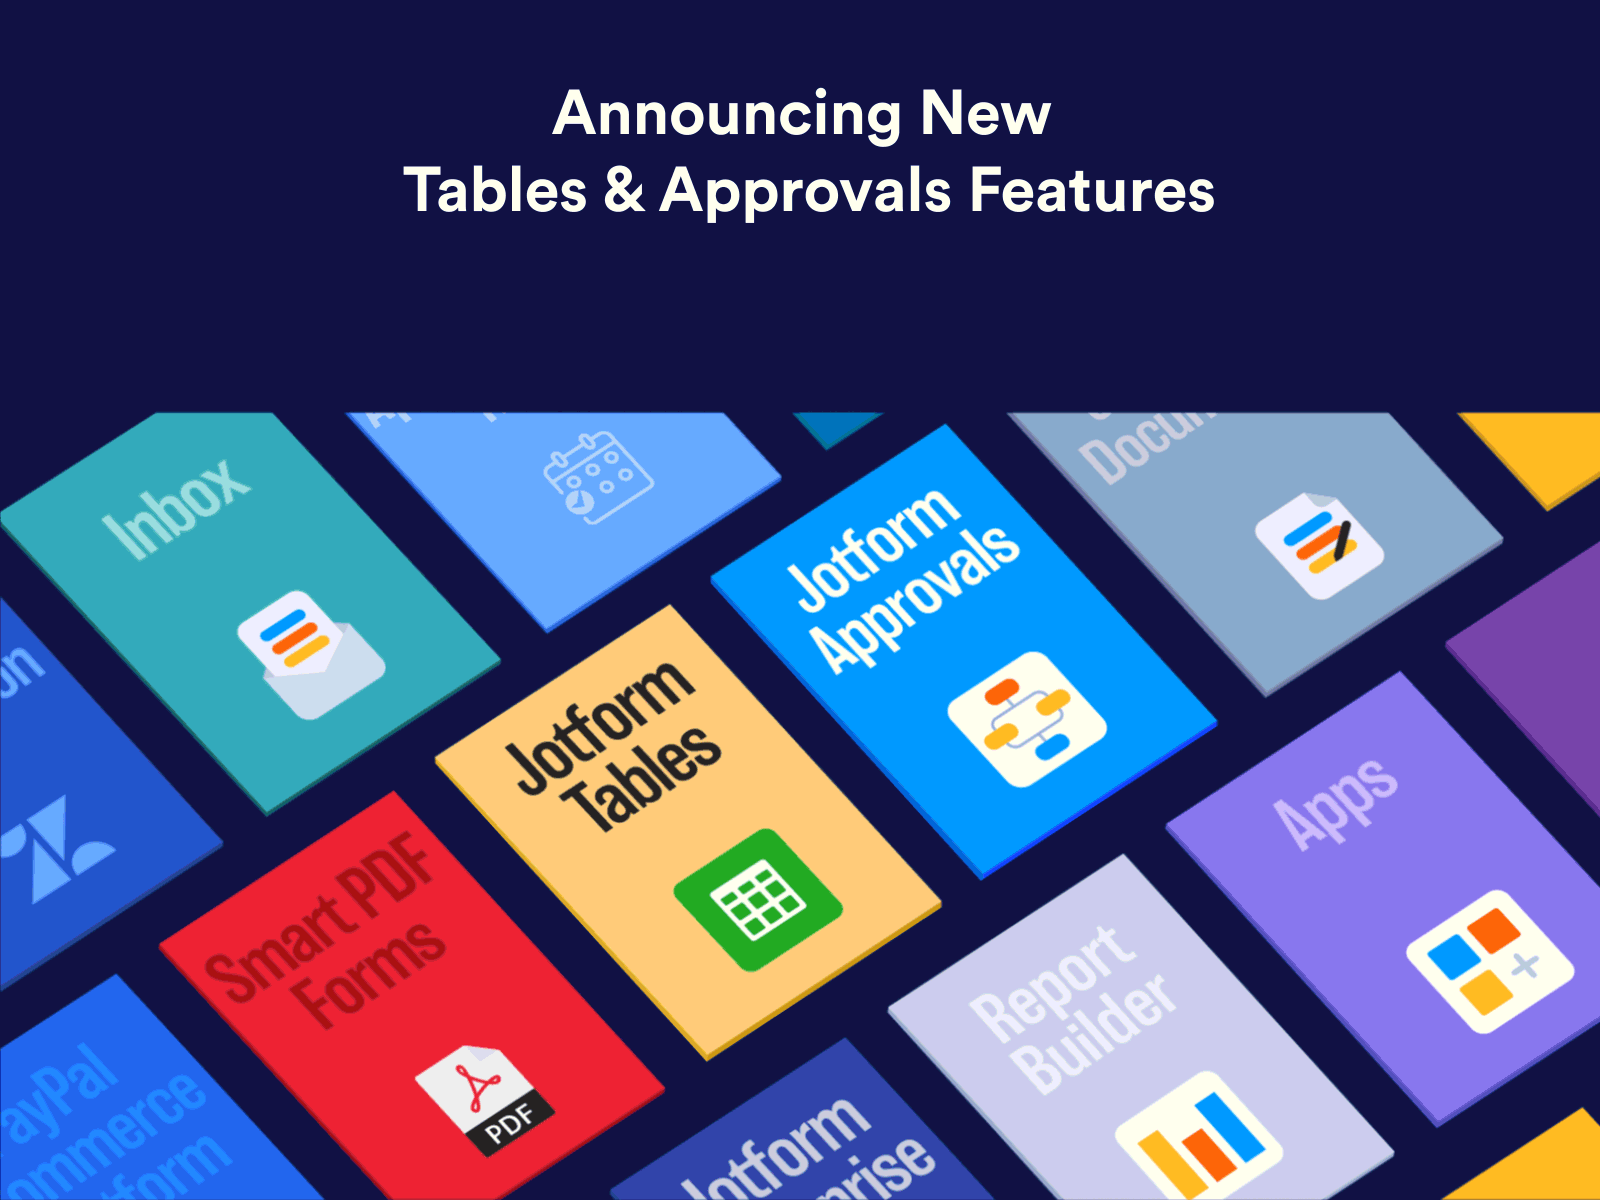 Announcing new Approvals and Tables features